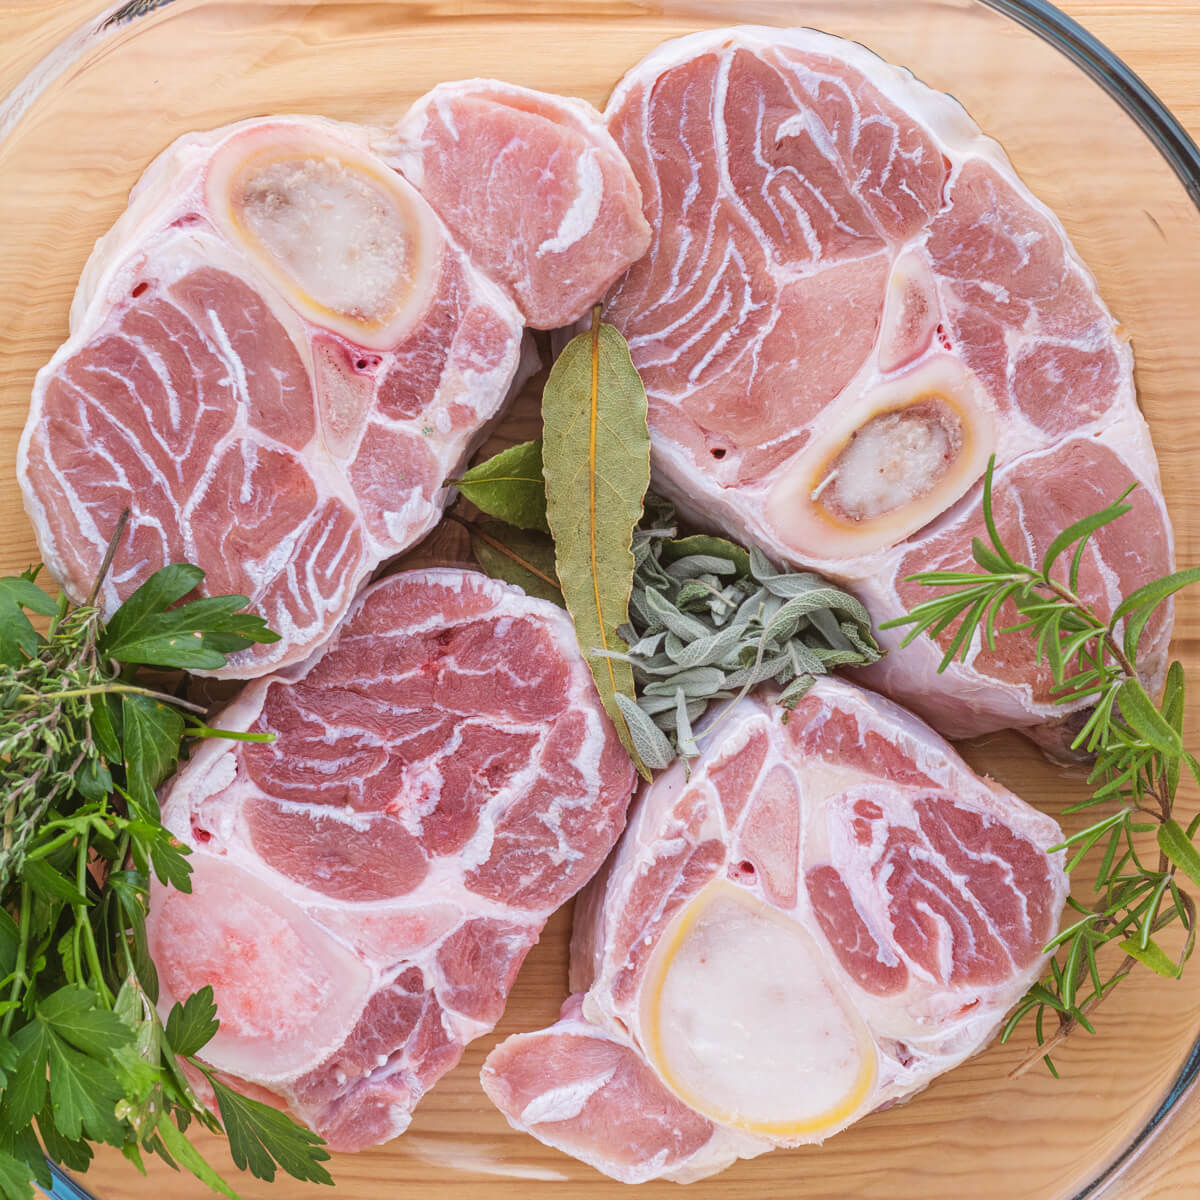 Four raw veal osso bucco surrounded by aromatic green herbs.